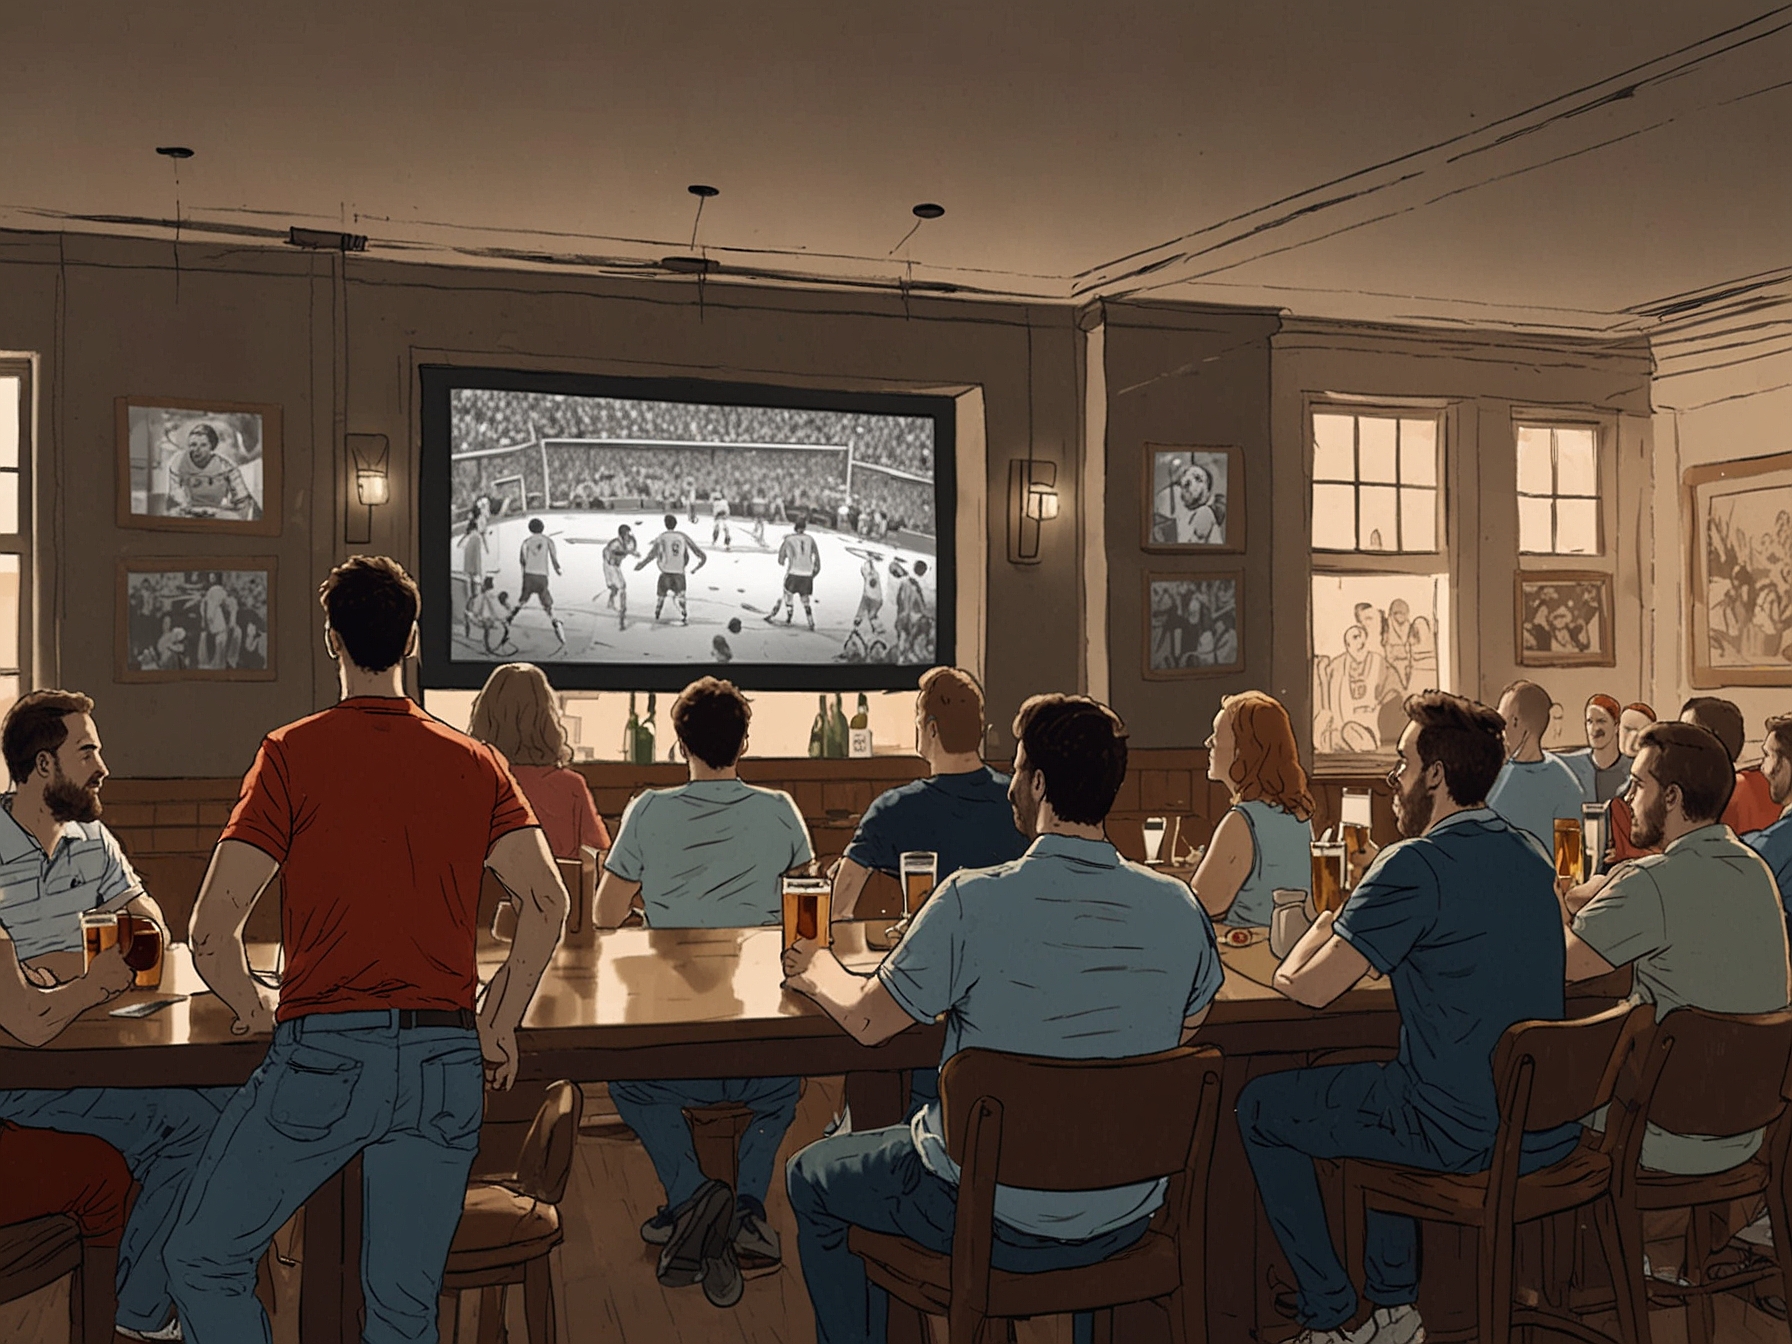 A crowded sports bar with U.S. soccer fans watching the France vs. Austria game on multiple large TV screens, capturing the excitement and engagement of the viewers.